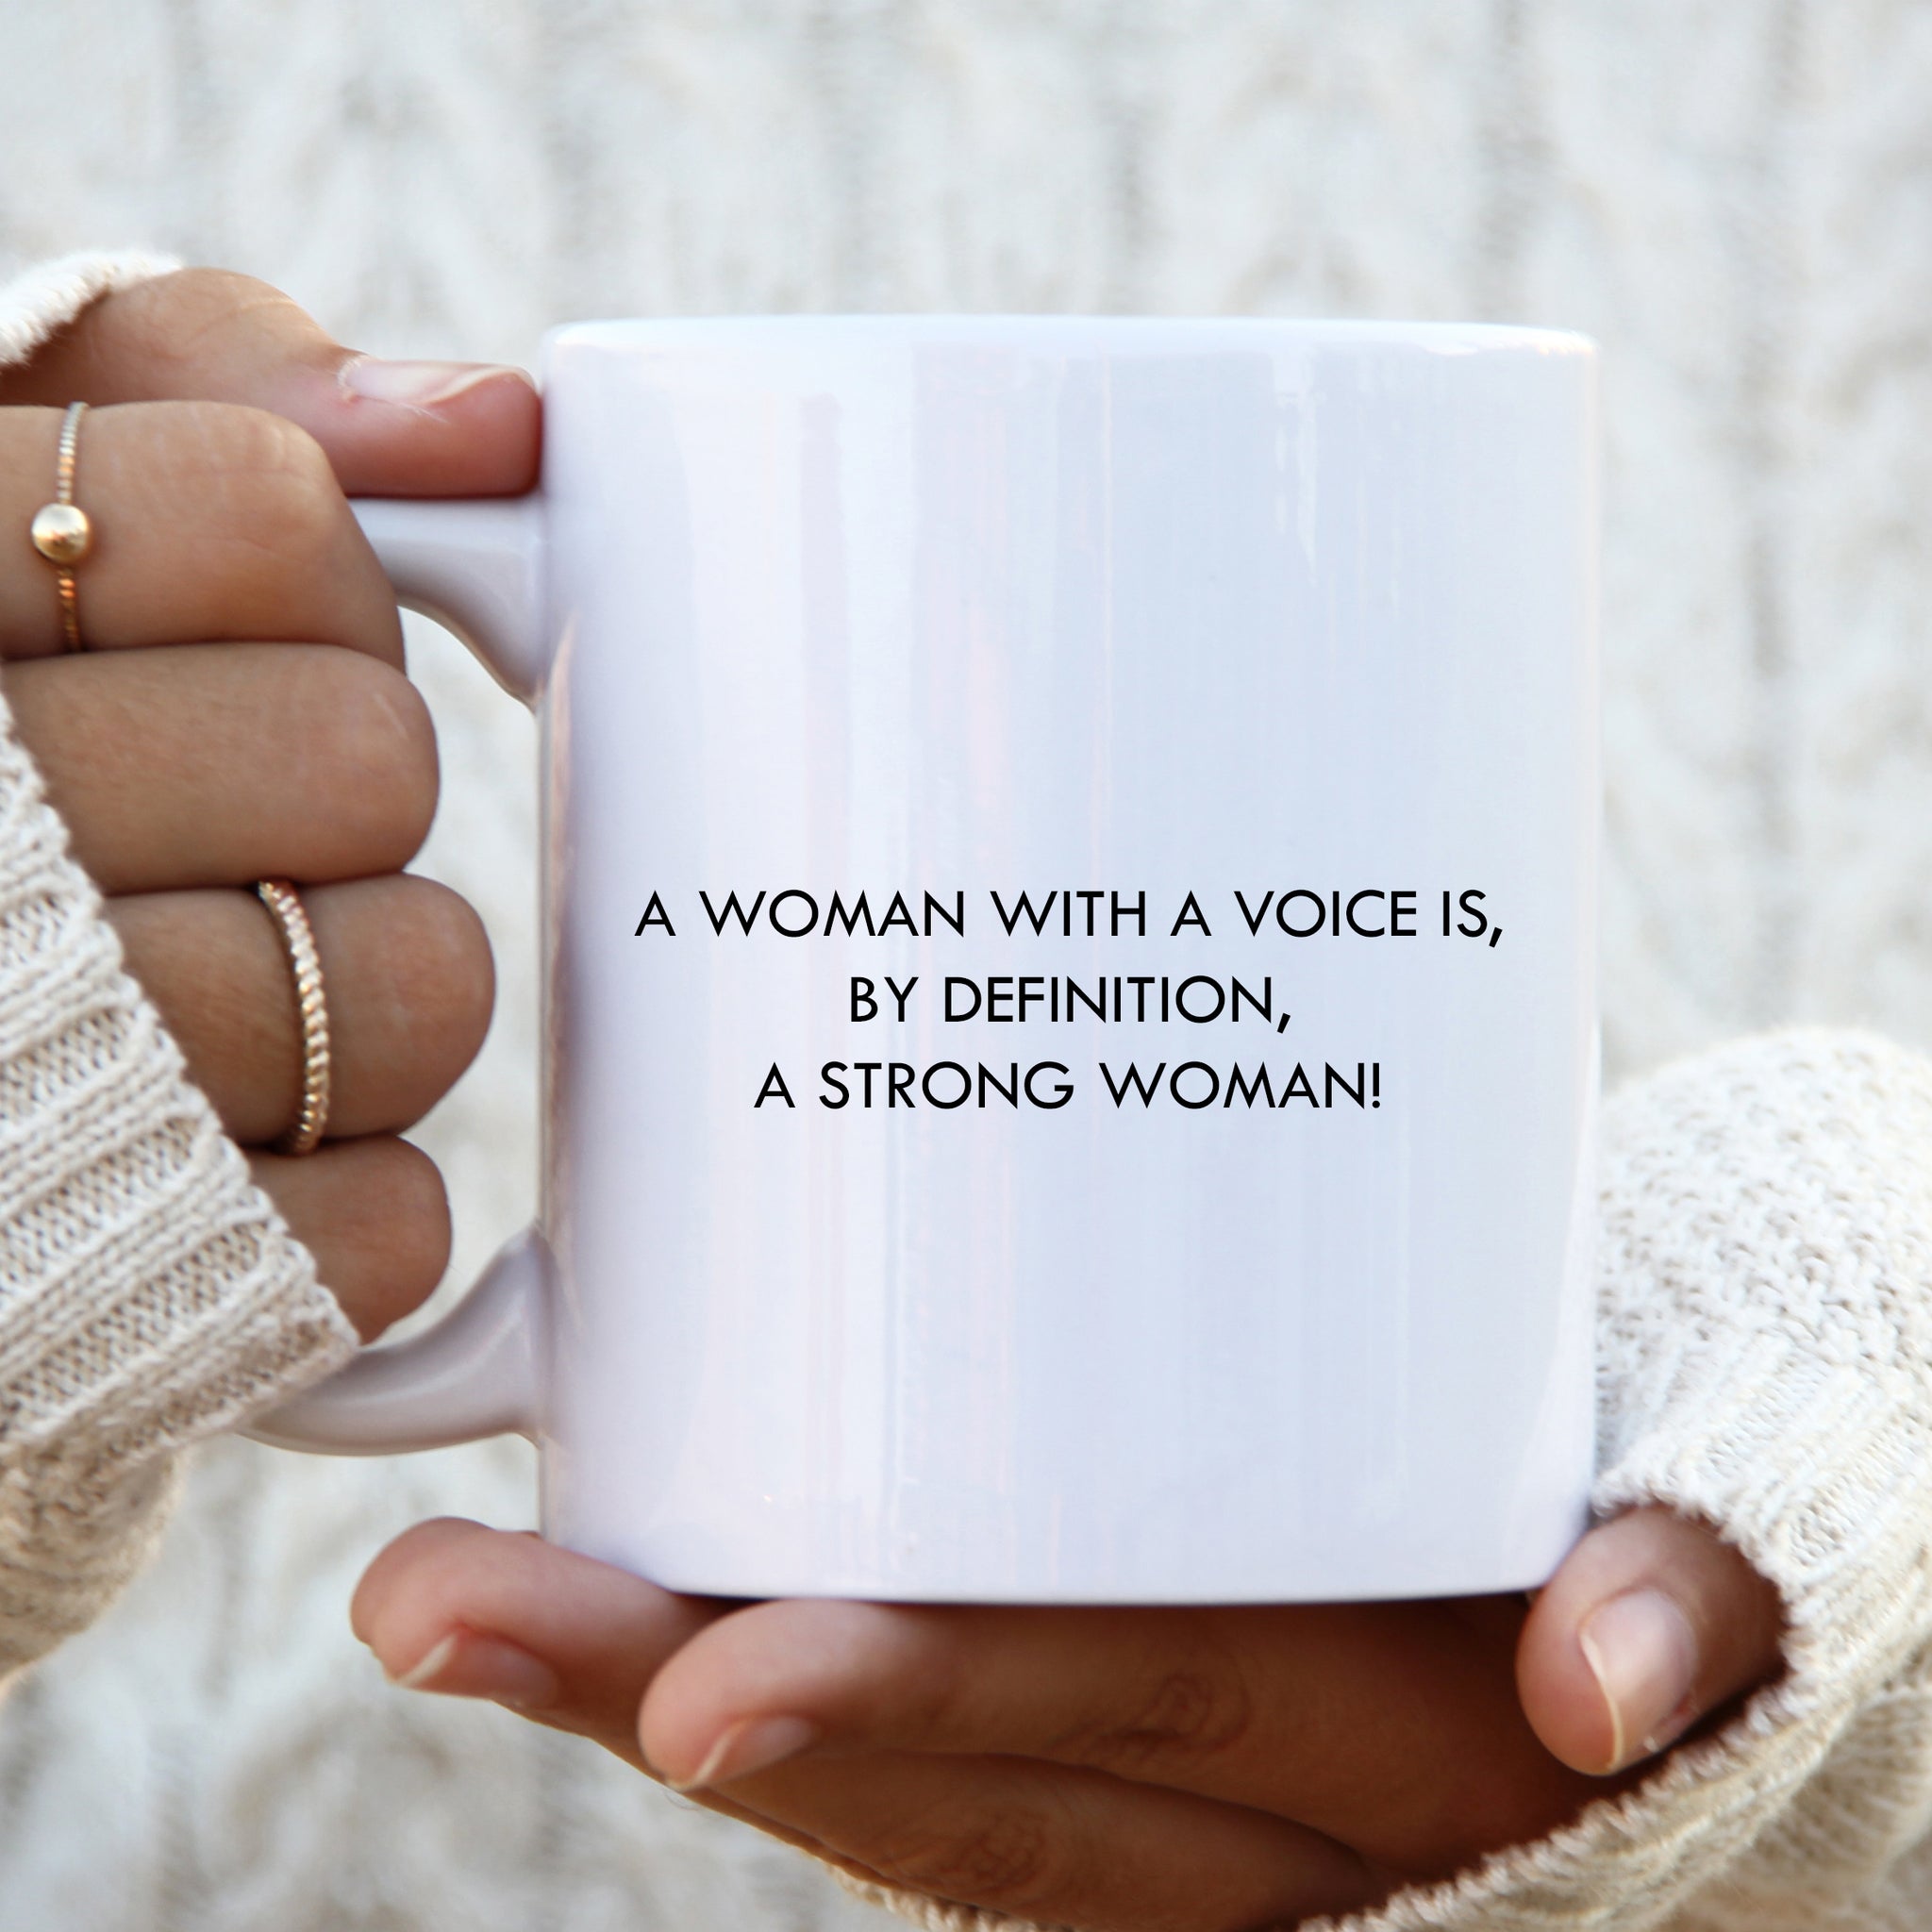 Woman With a Voice is a Strong Woman Mug, Inspirational Gift Cup